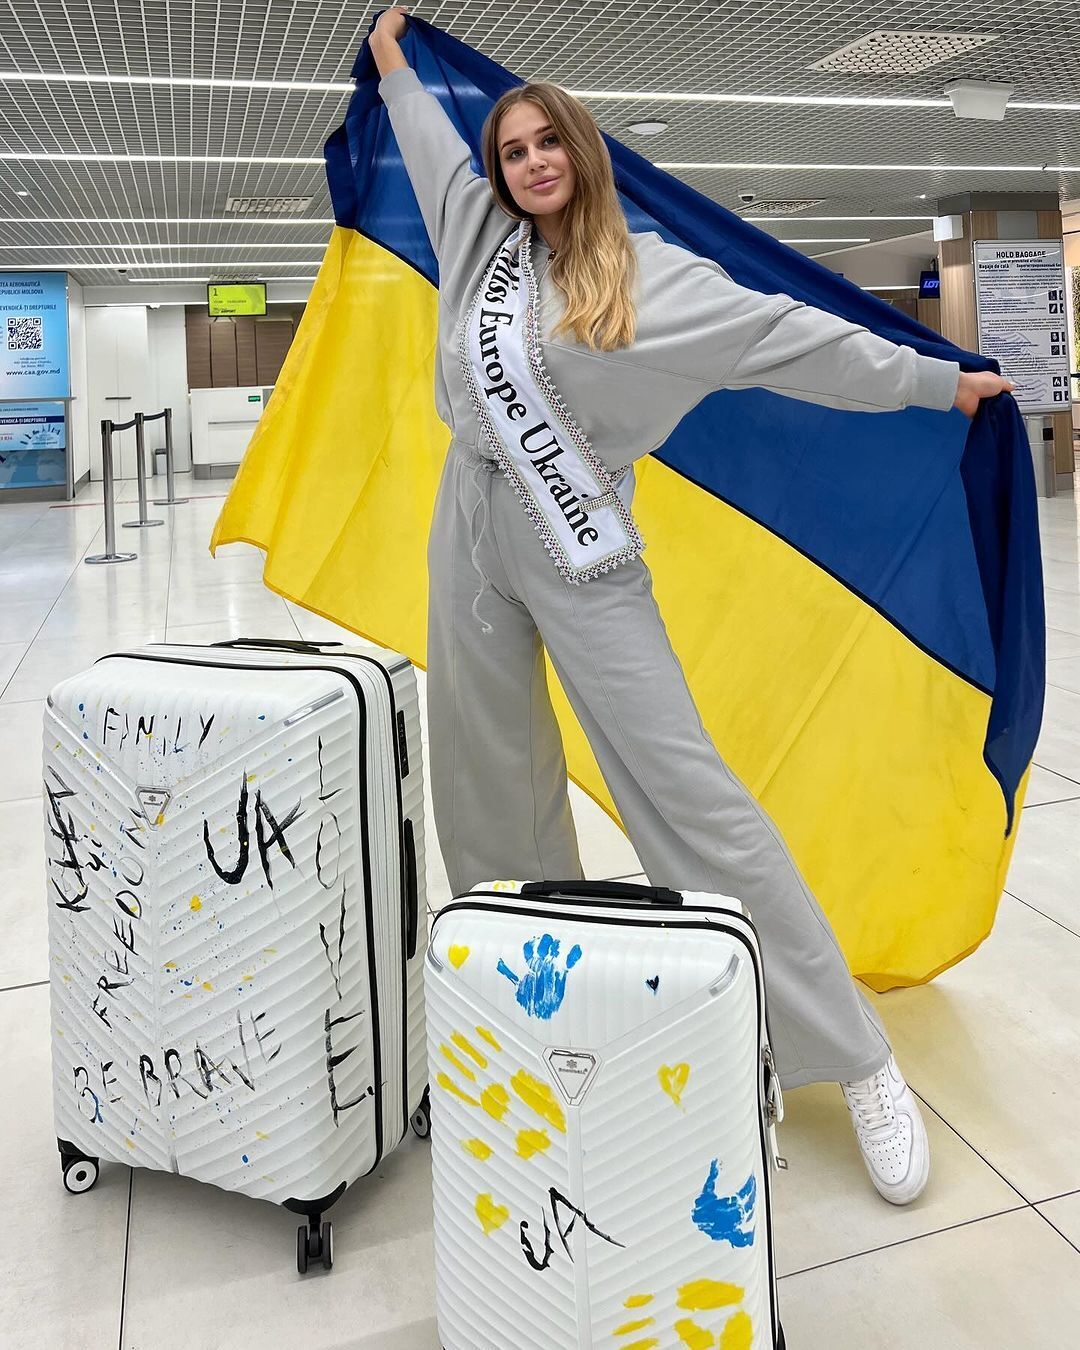 Called a Nazi and forced to take a picture with a Russian woman: Ukrainian woman shocked with details about the Miss Europe contest